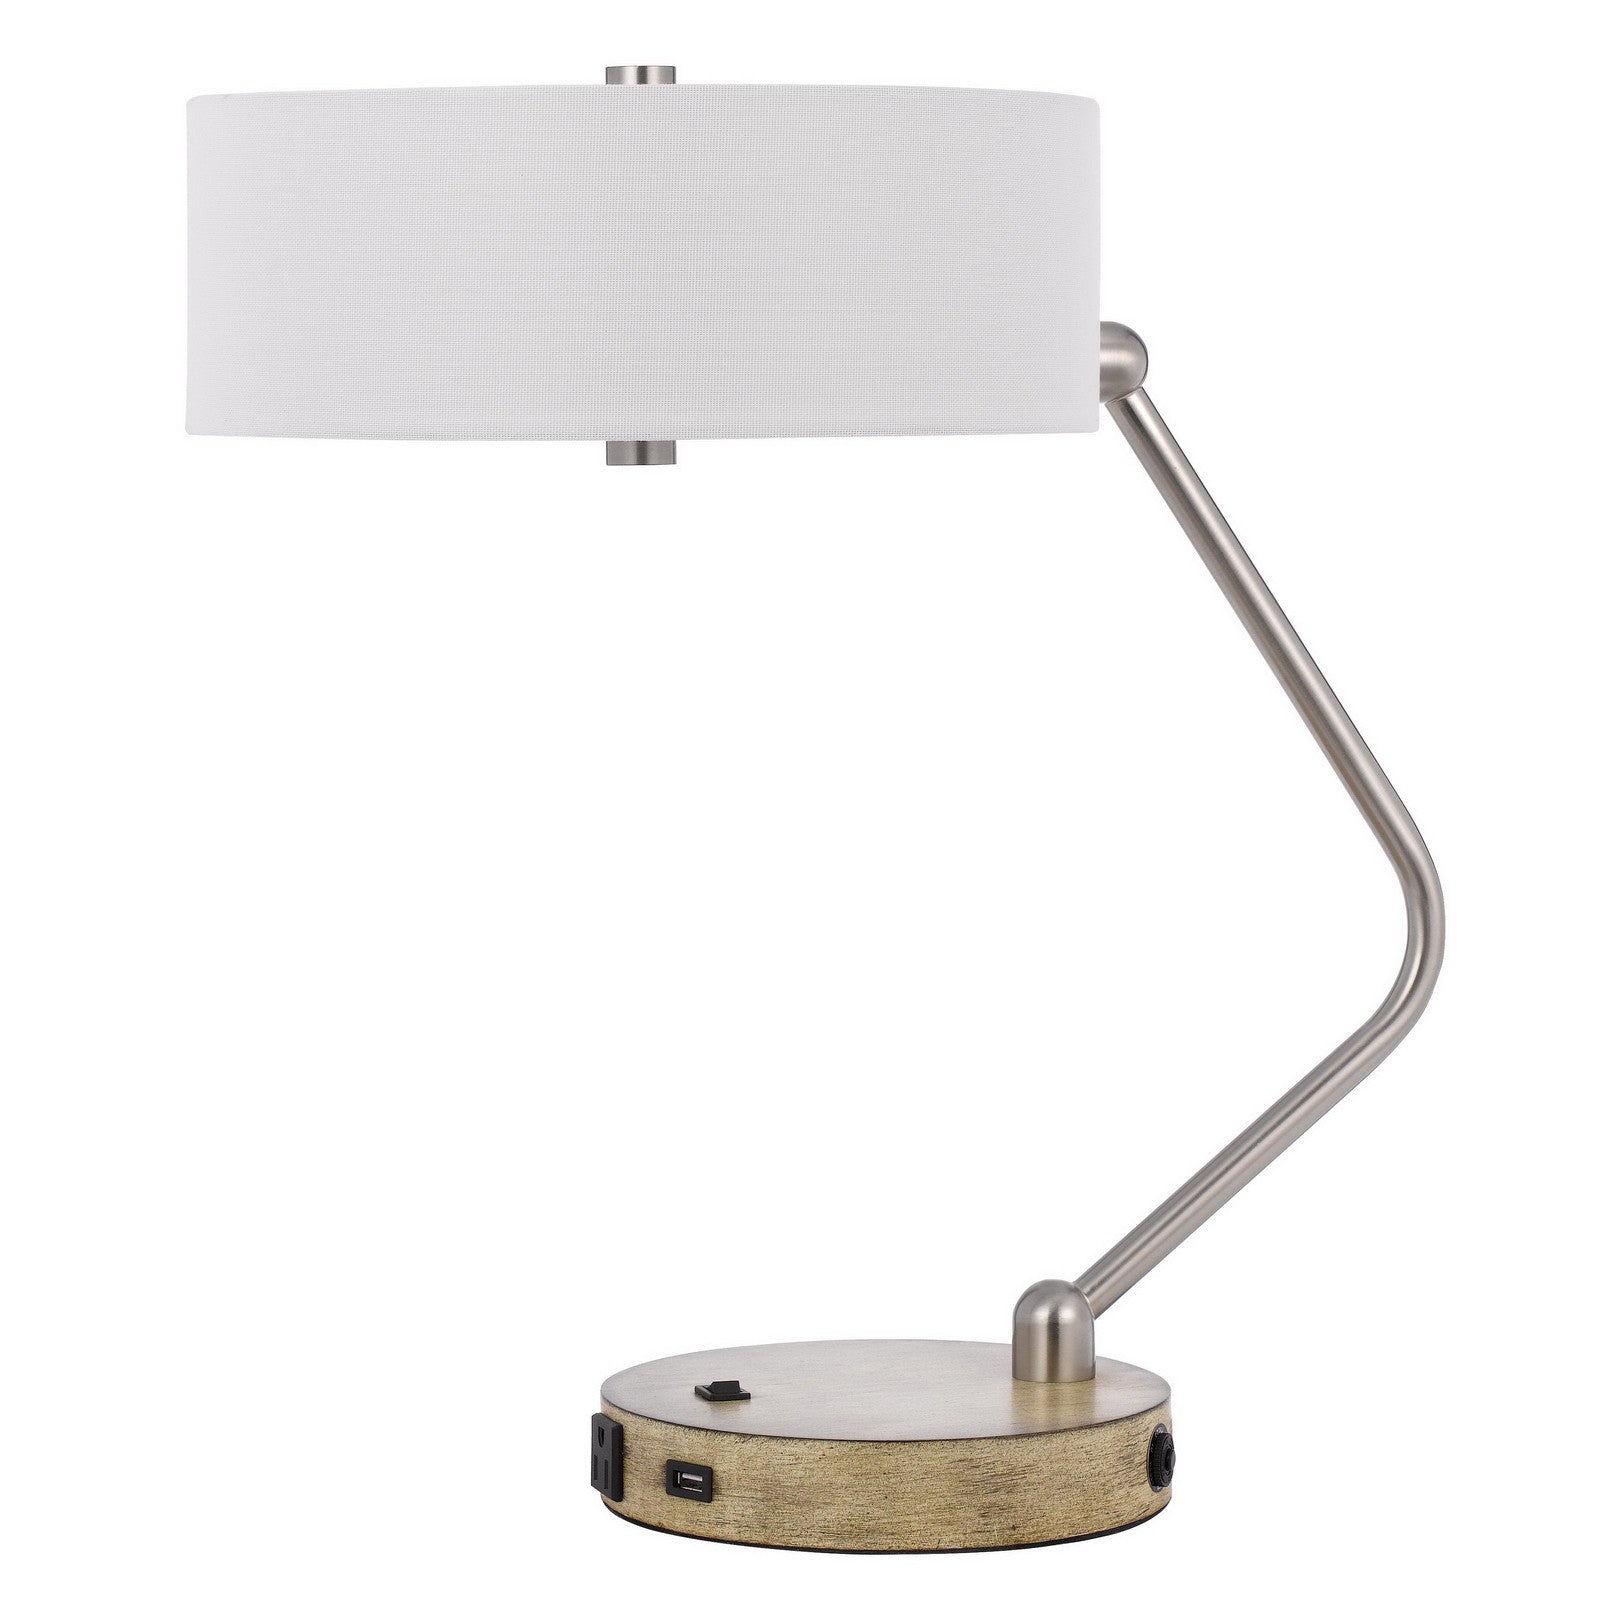 20" Nickel Metal Two Light Desk Usb Table Lamp With White Drum Shade